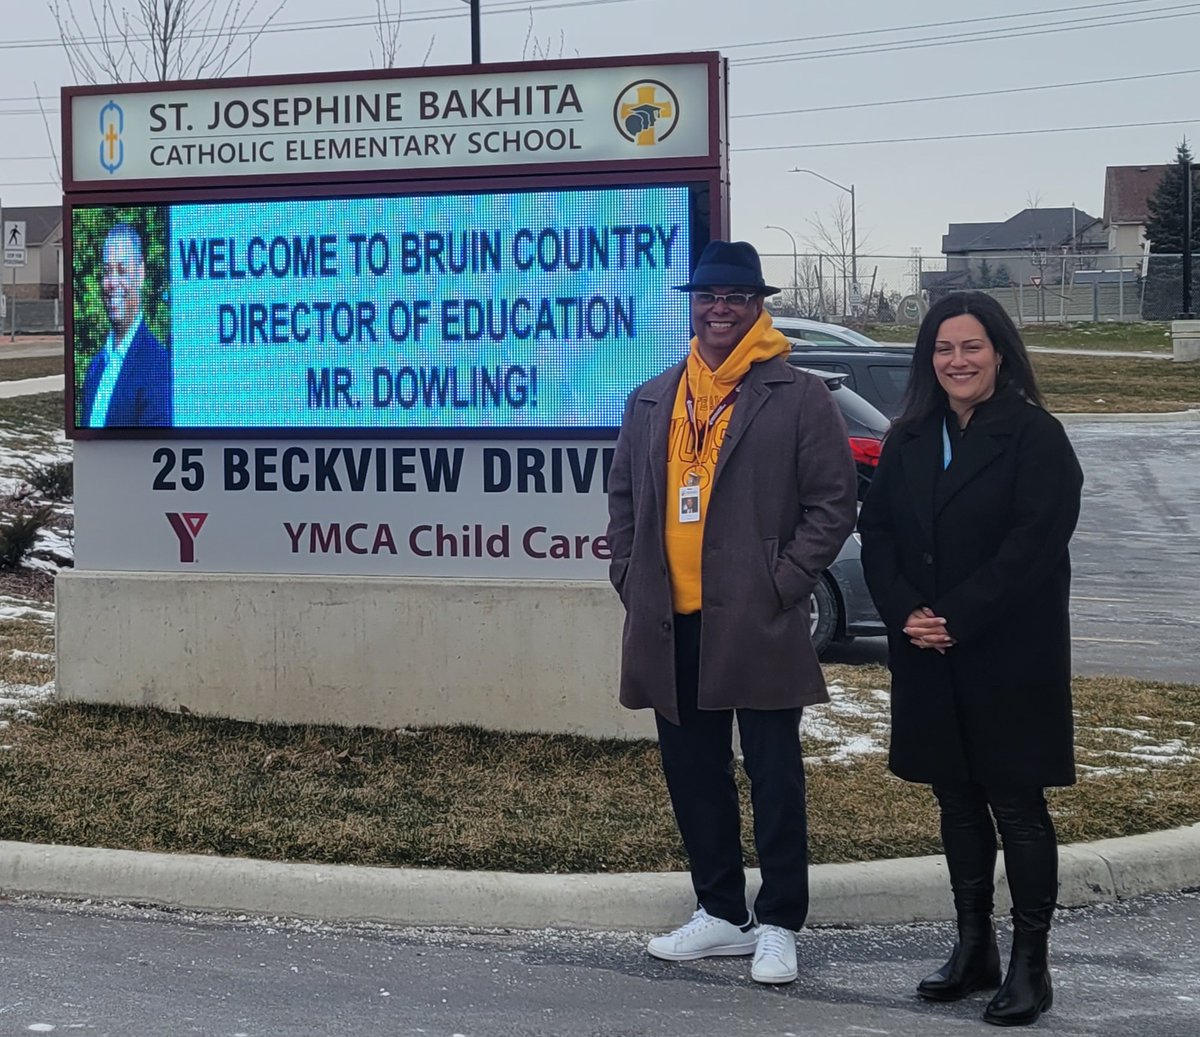 Thank you for your visit today, Mr. Dowling! #WCDSBStrengthen #WCDSBAwesome #WELCOMETOBRUINCOUNTRY